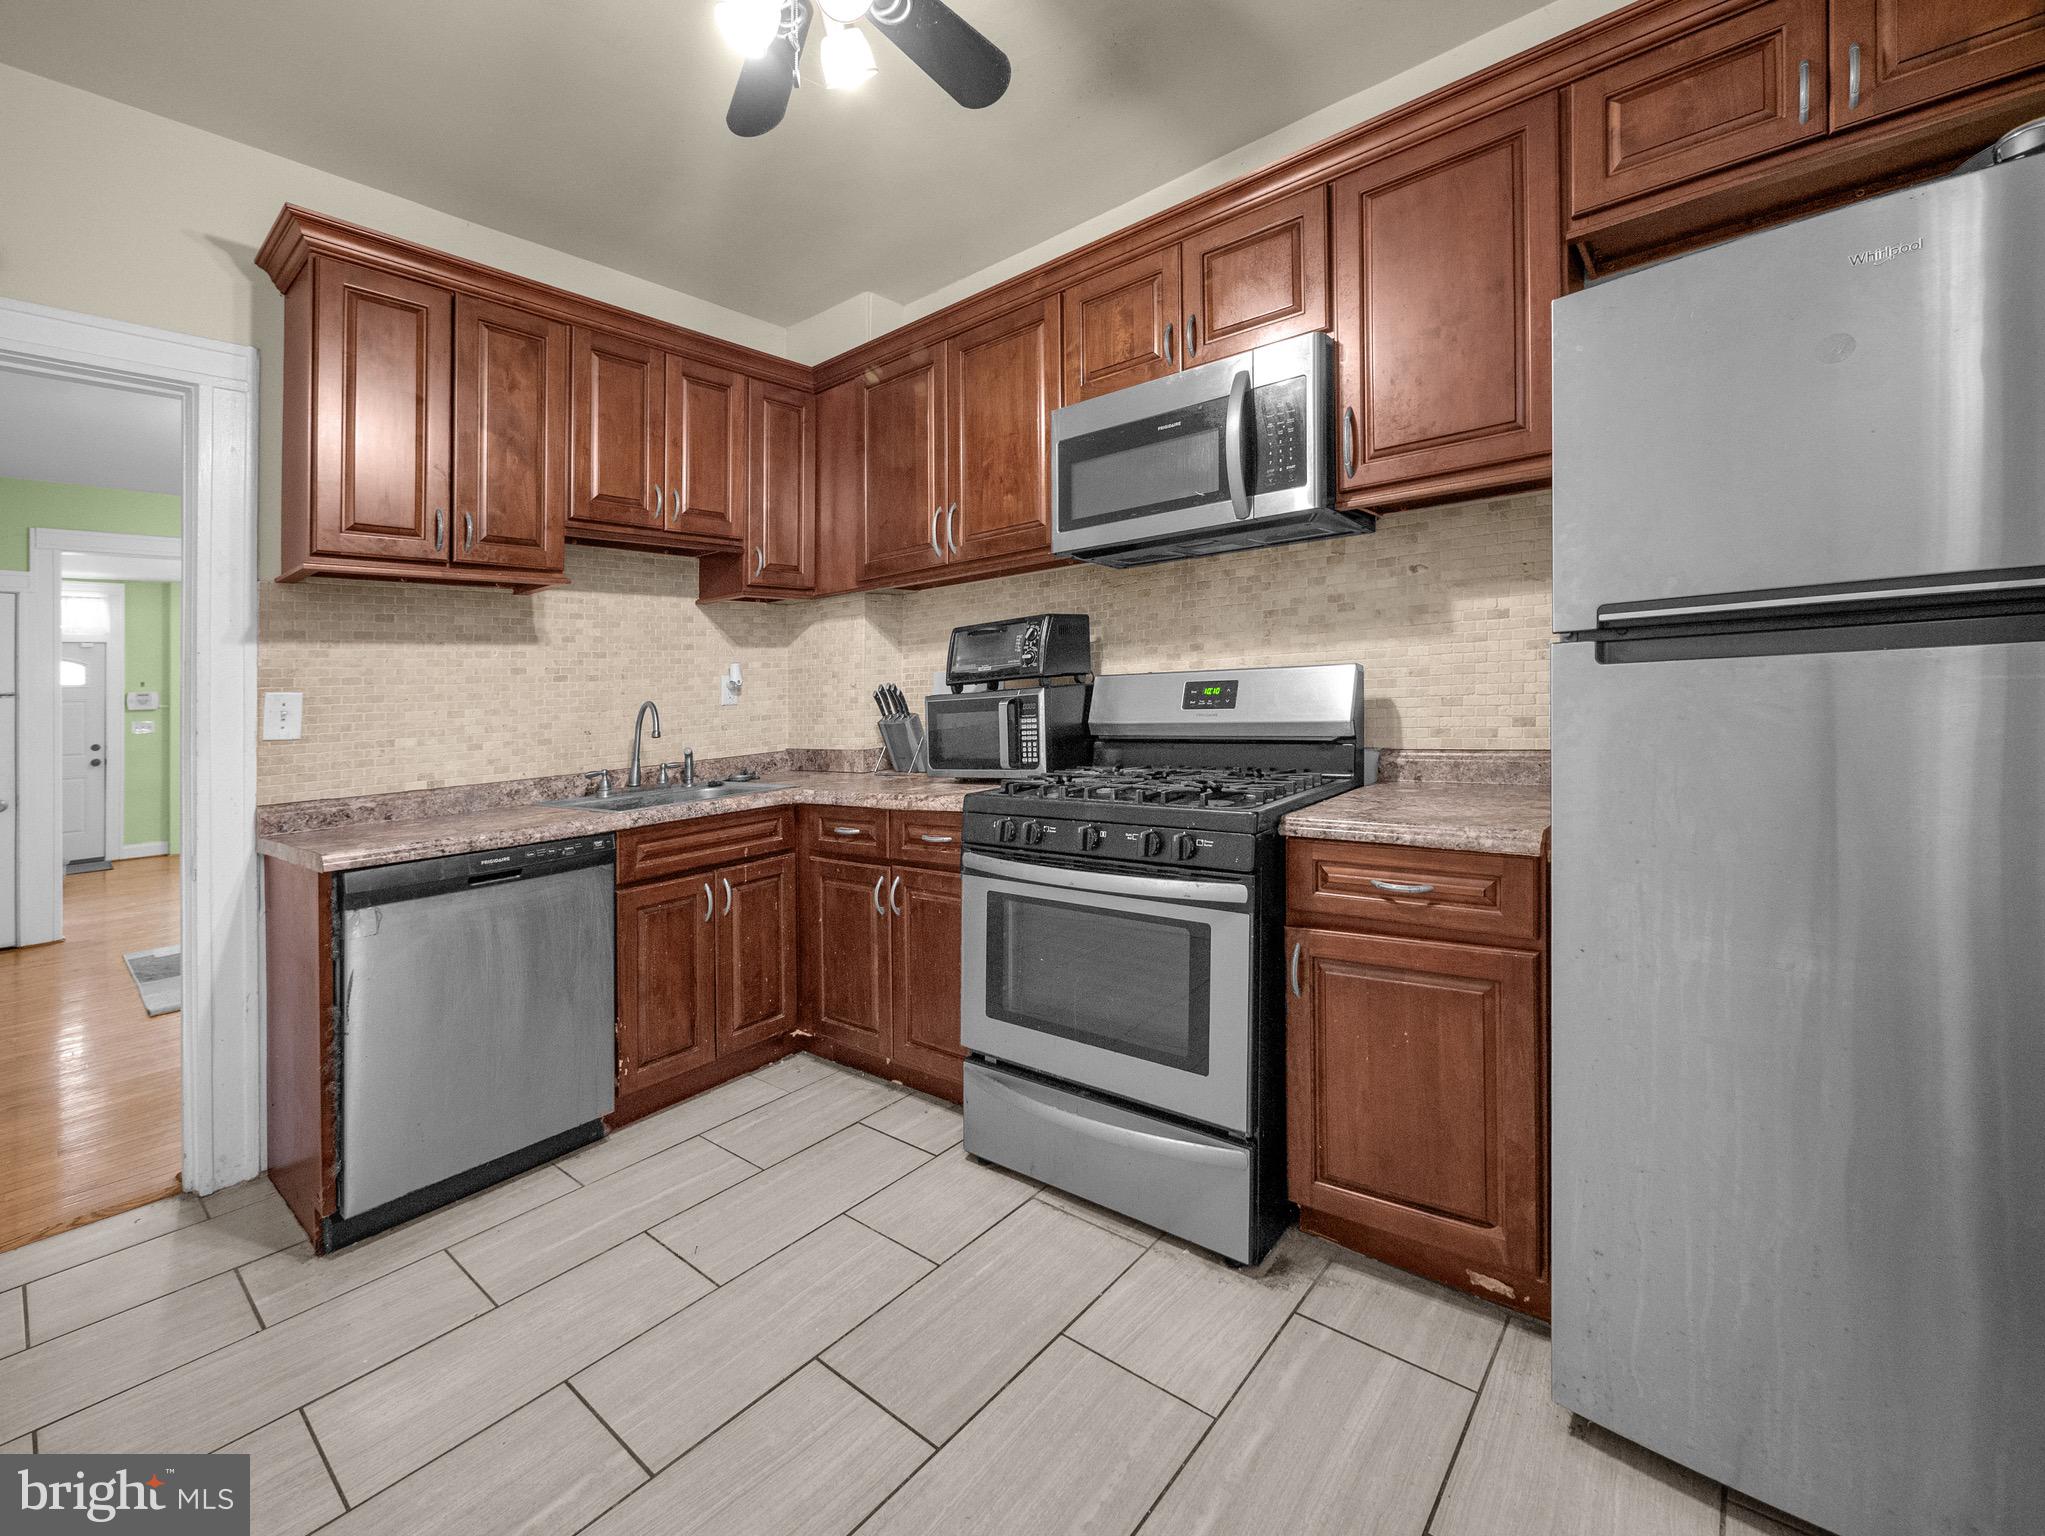 a kitchen with stainless steel appliances granite countertop a stove microwave sink and refrigerator